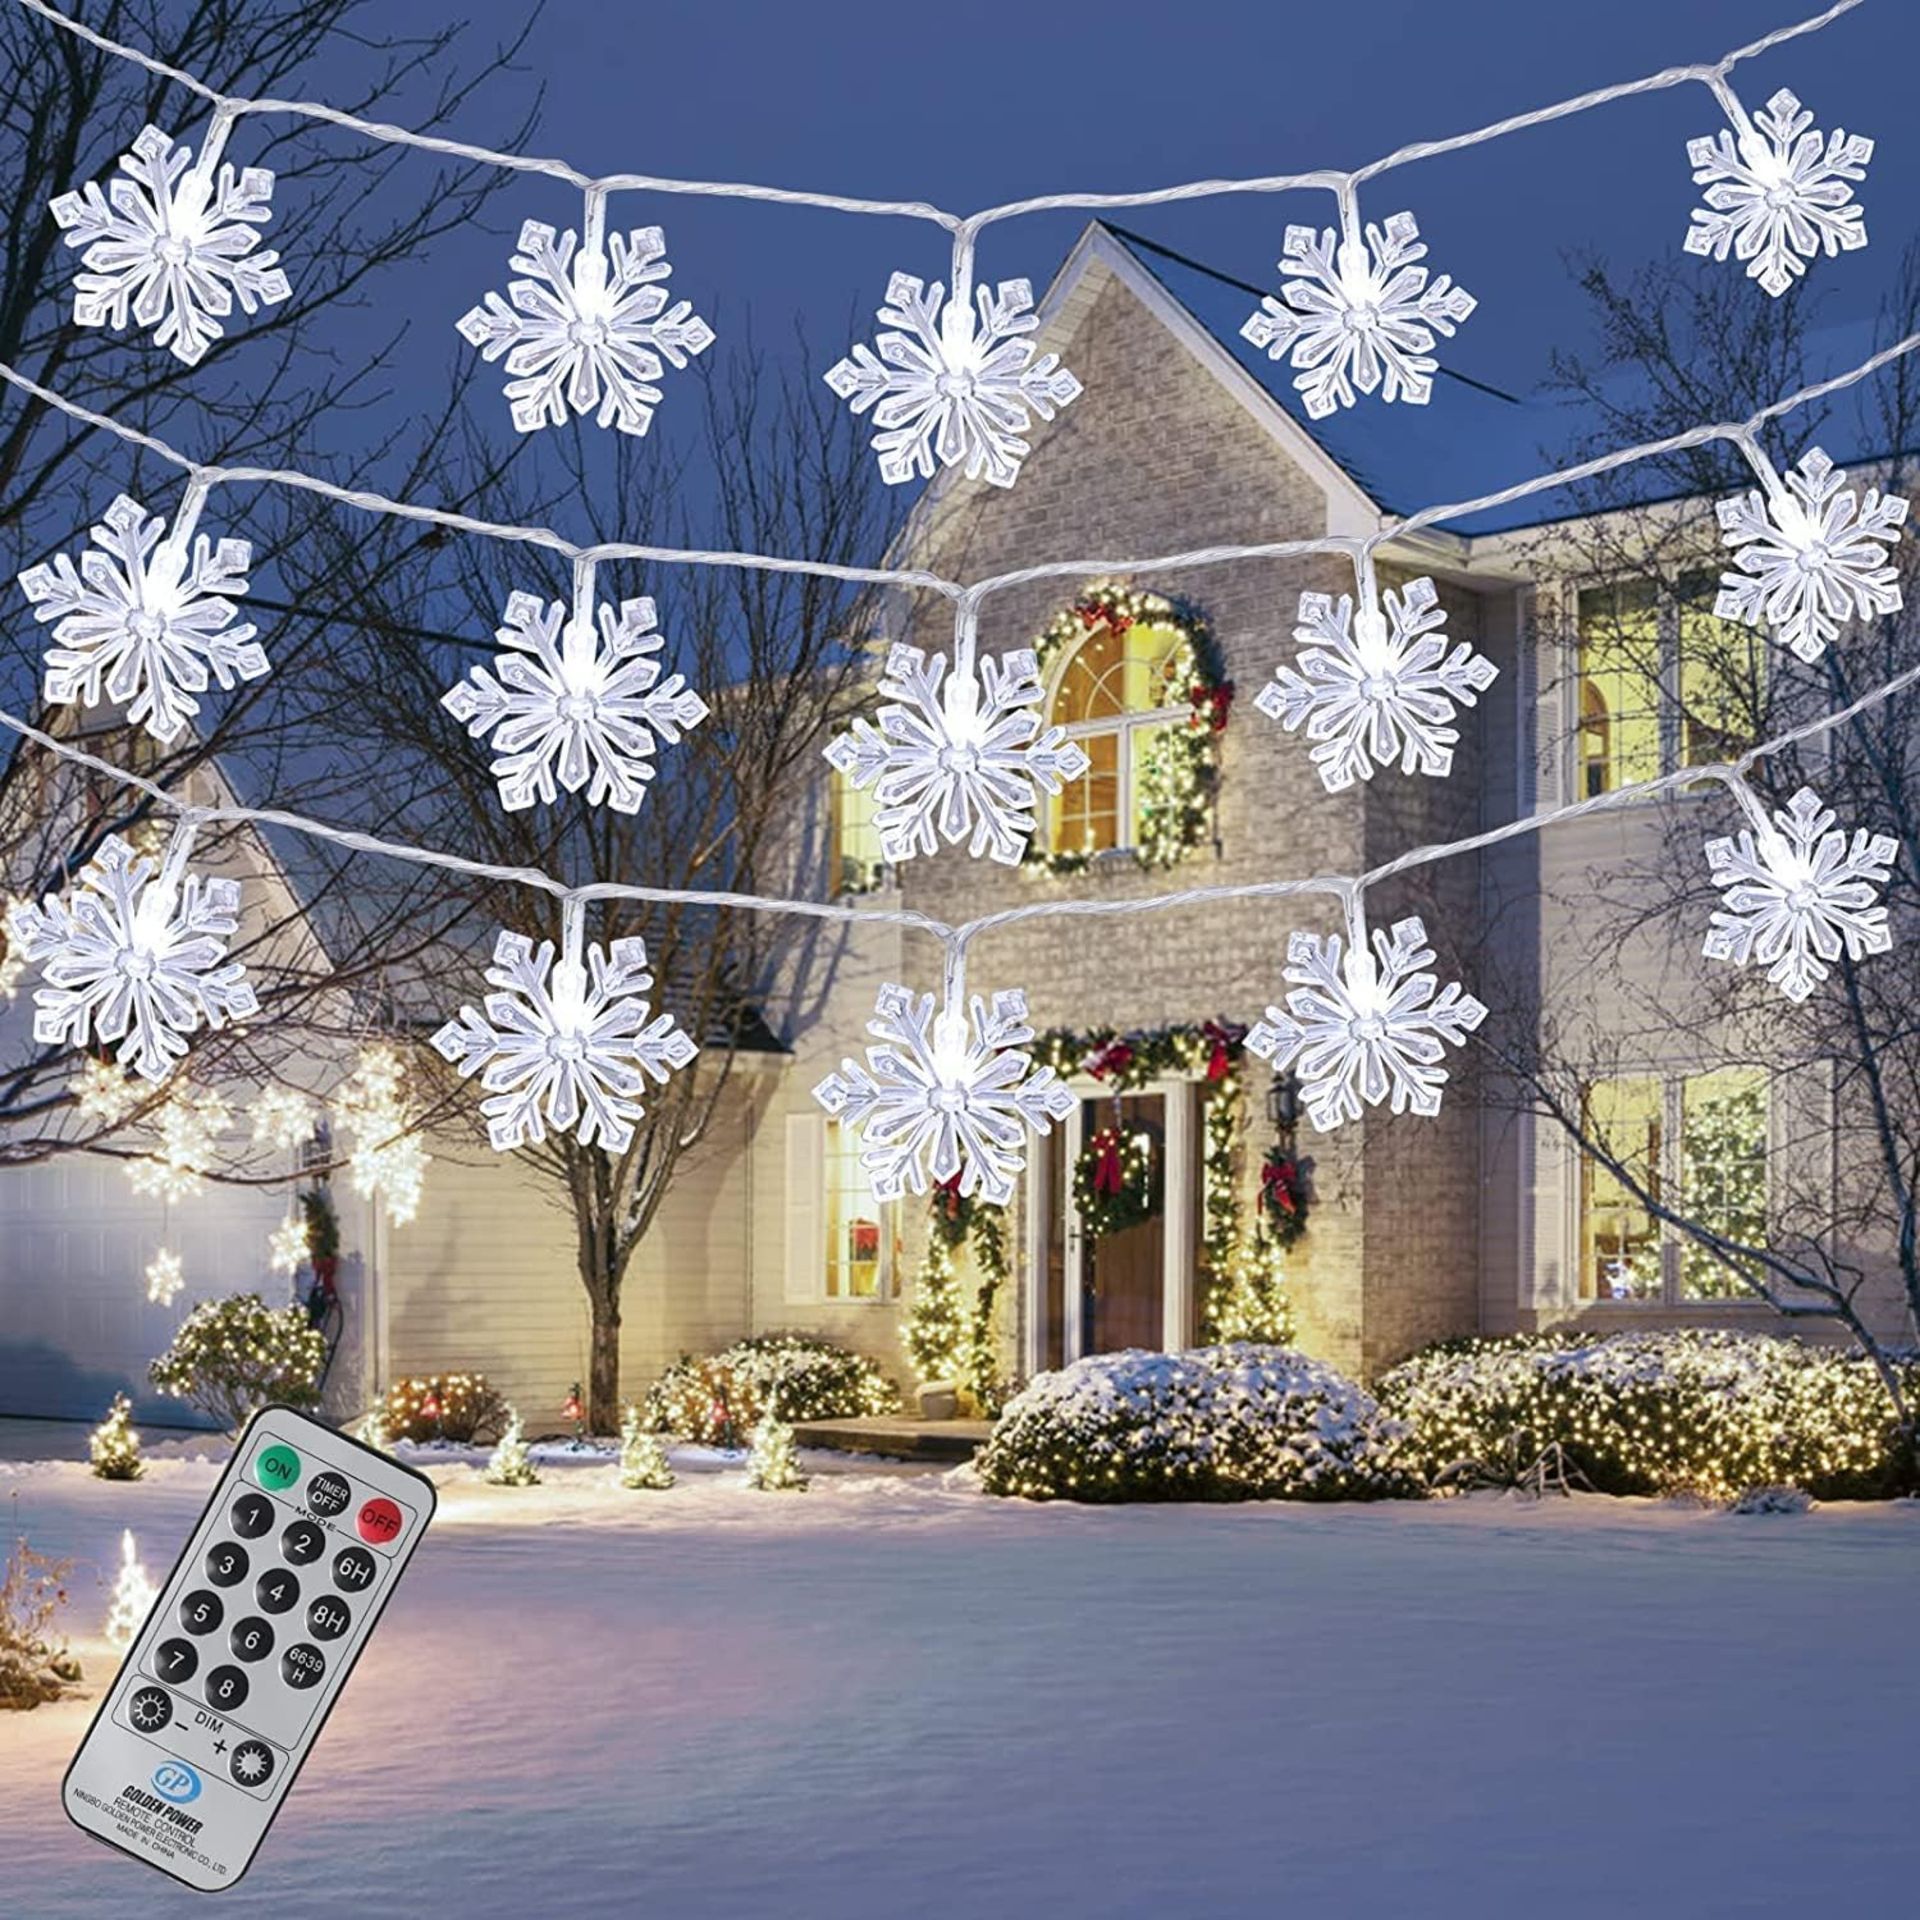 4 x NEW & BOXED SETS OF Snowflake String Lights, 8m/26ft 50 LED Fairy Lights Plug in, 8 Modes - Image 2 of 3